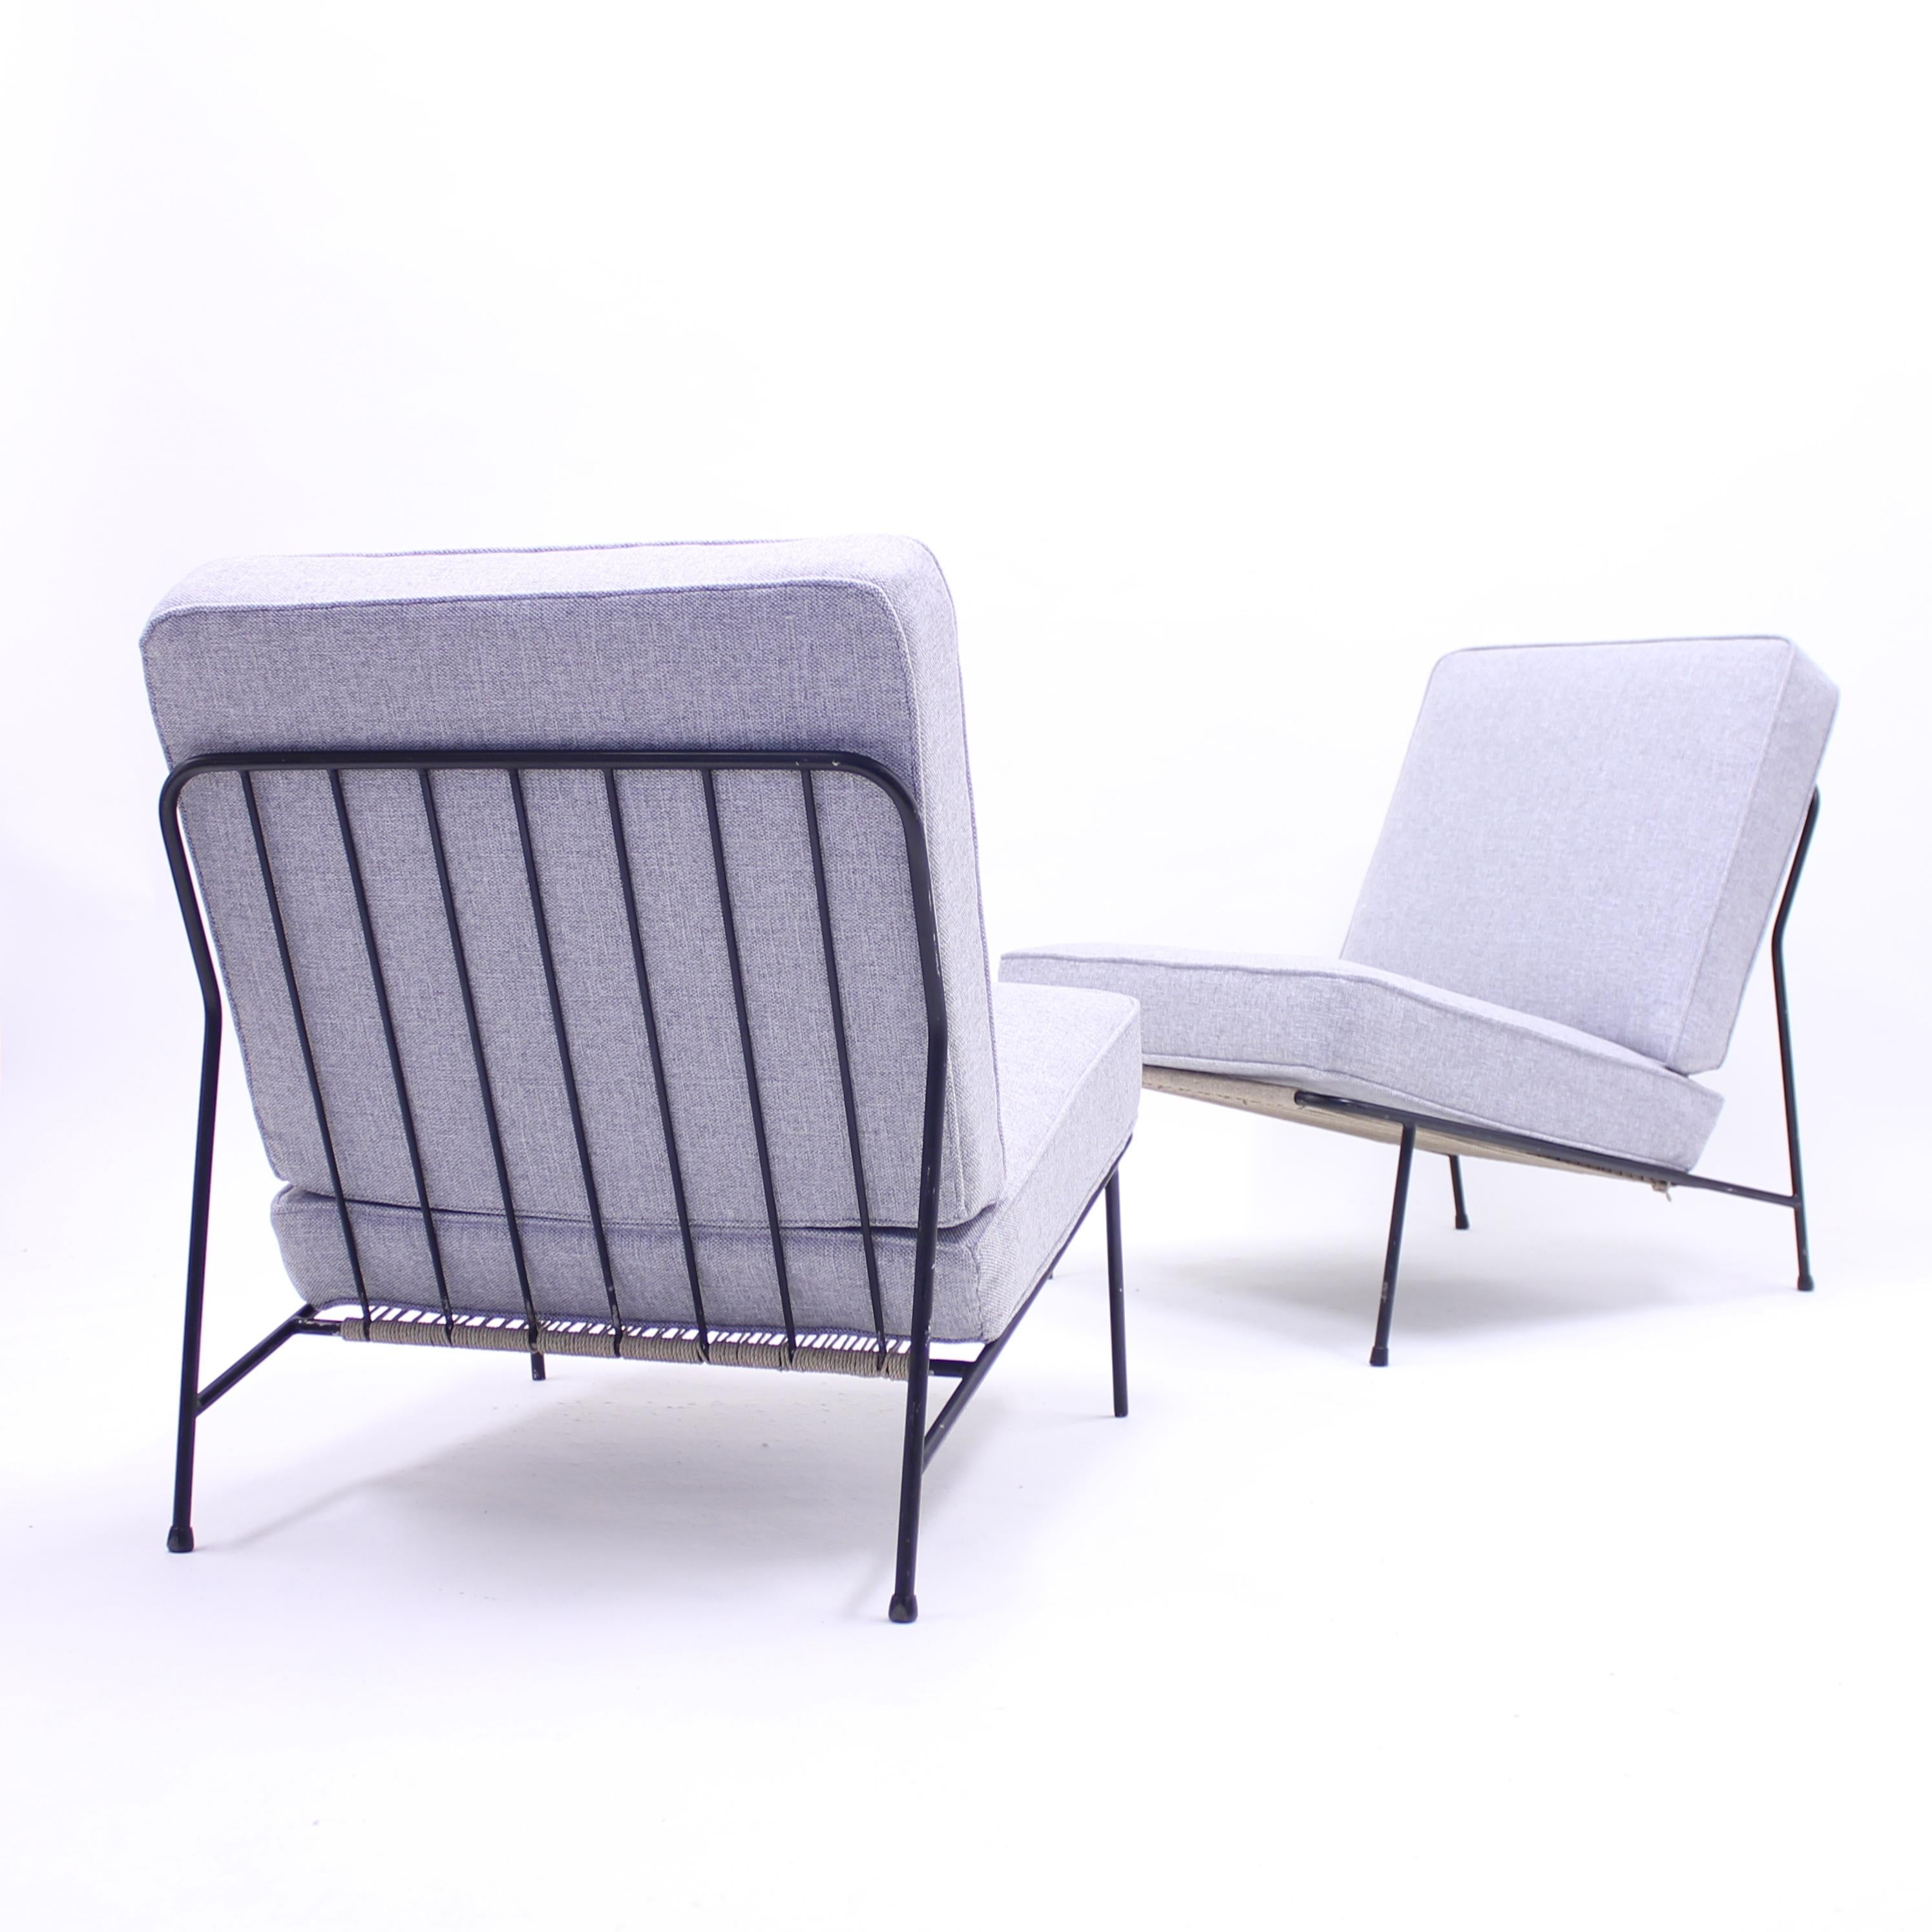 Alf Svensson, Pair of Domus Lounge Chairs, DUX, 1950s For Sale 2